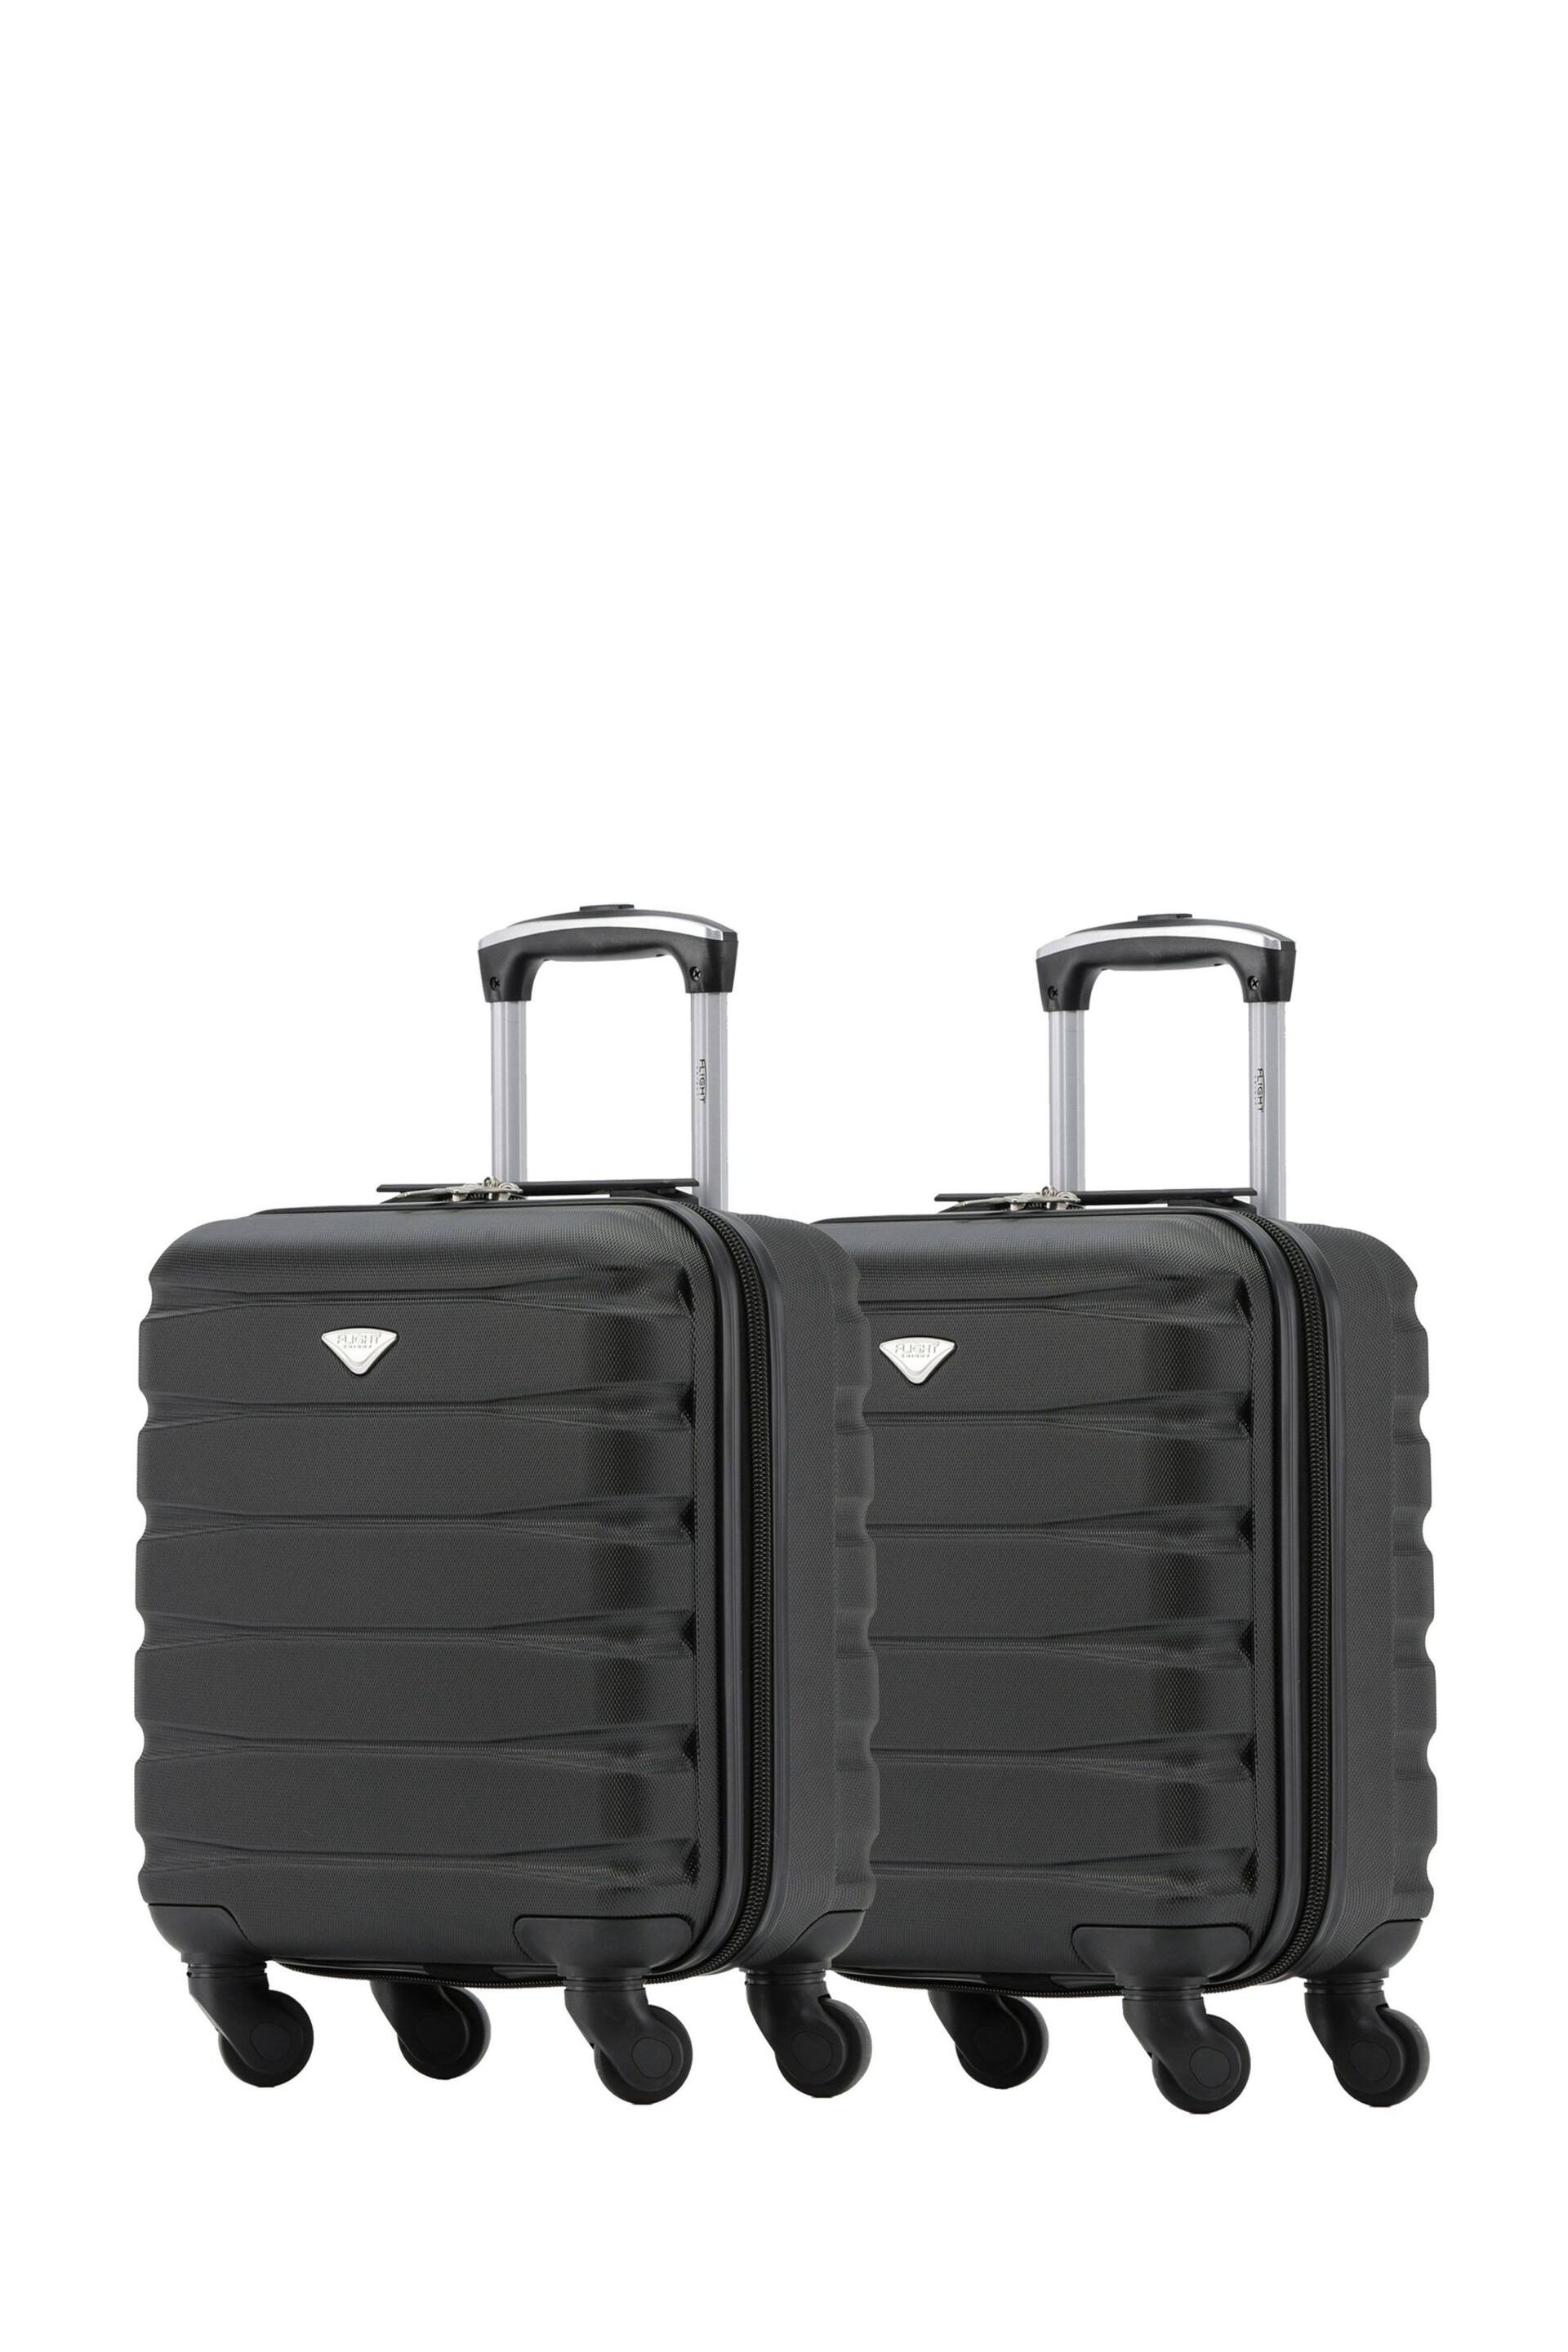 Flight Knight EasyJet Underseat 45x36x20cm 4 Wheel ABS Hard Case Cabin Carry On Suitcase Set Of 2 - Image 1 of 3